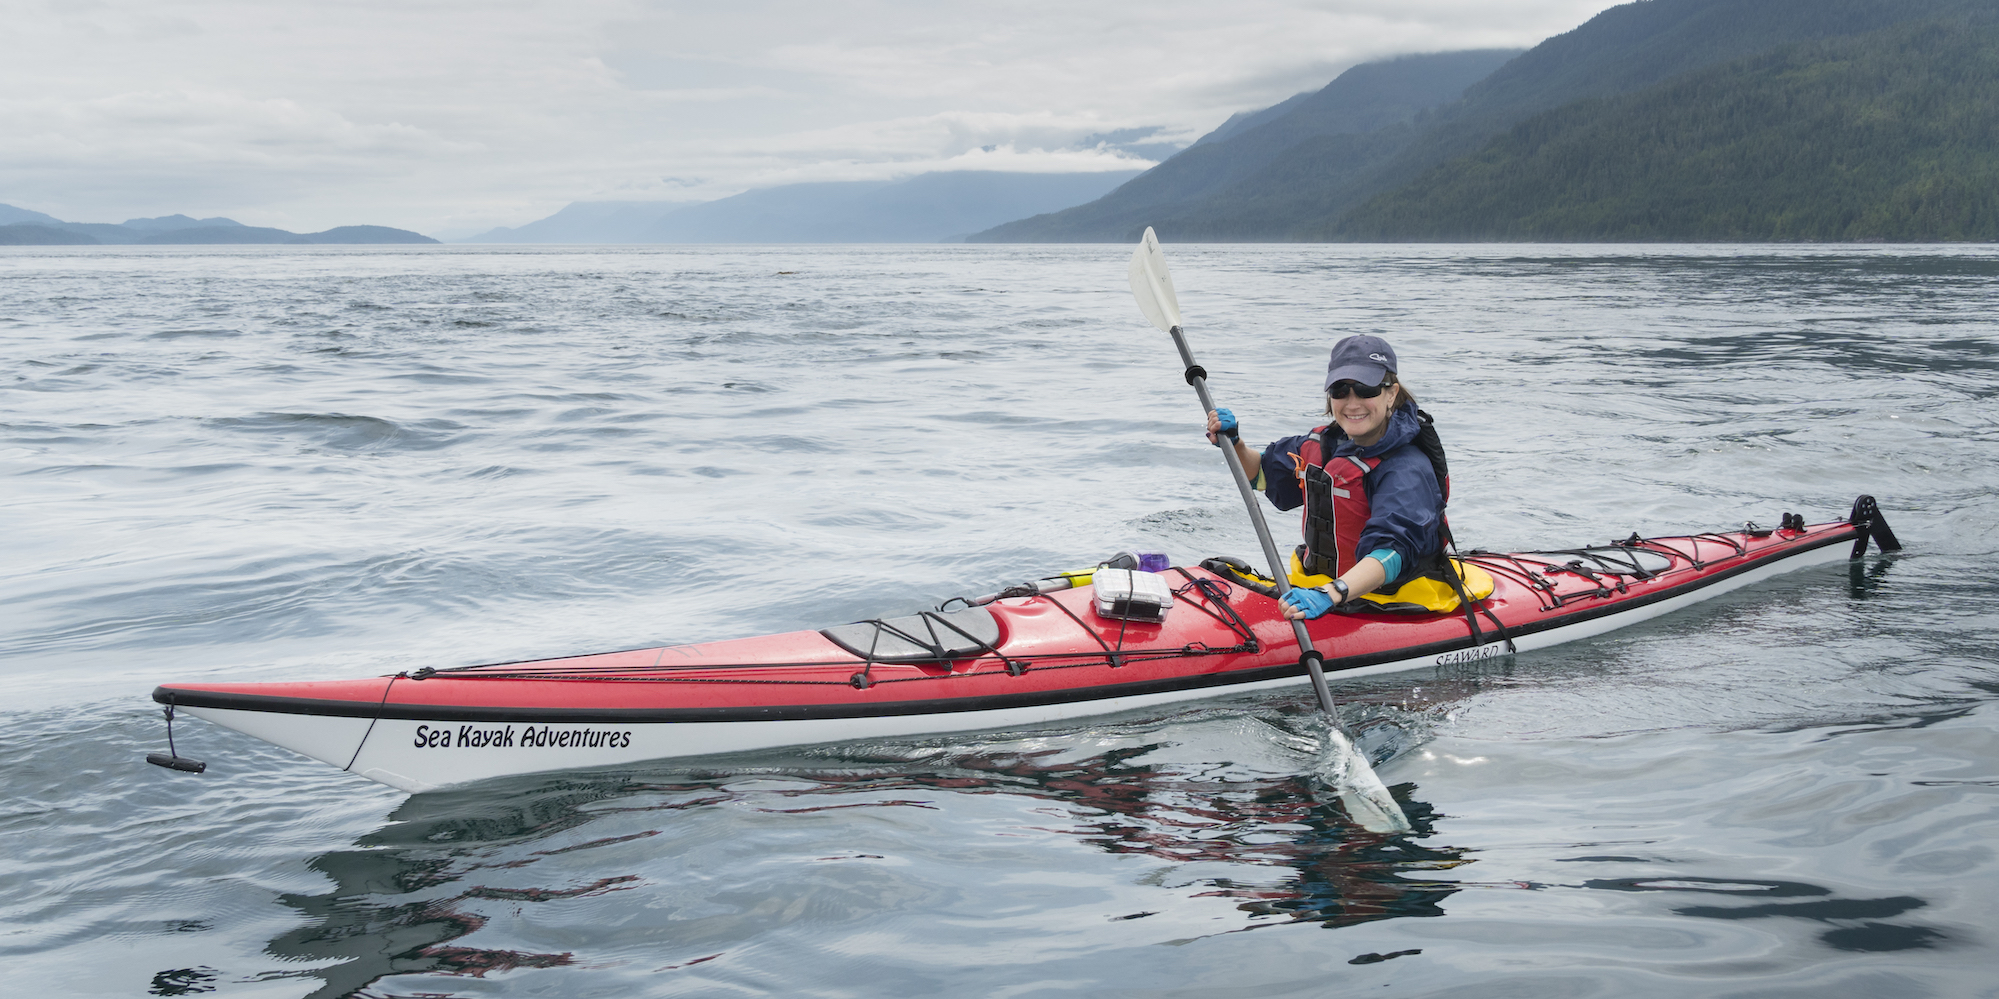 A woman in a red and white Seaward sea kayak paddling and smiling for the camera on a foggy day in British Columbia